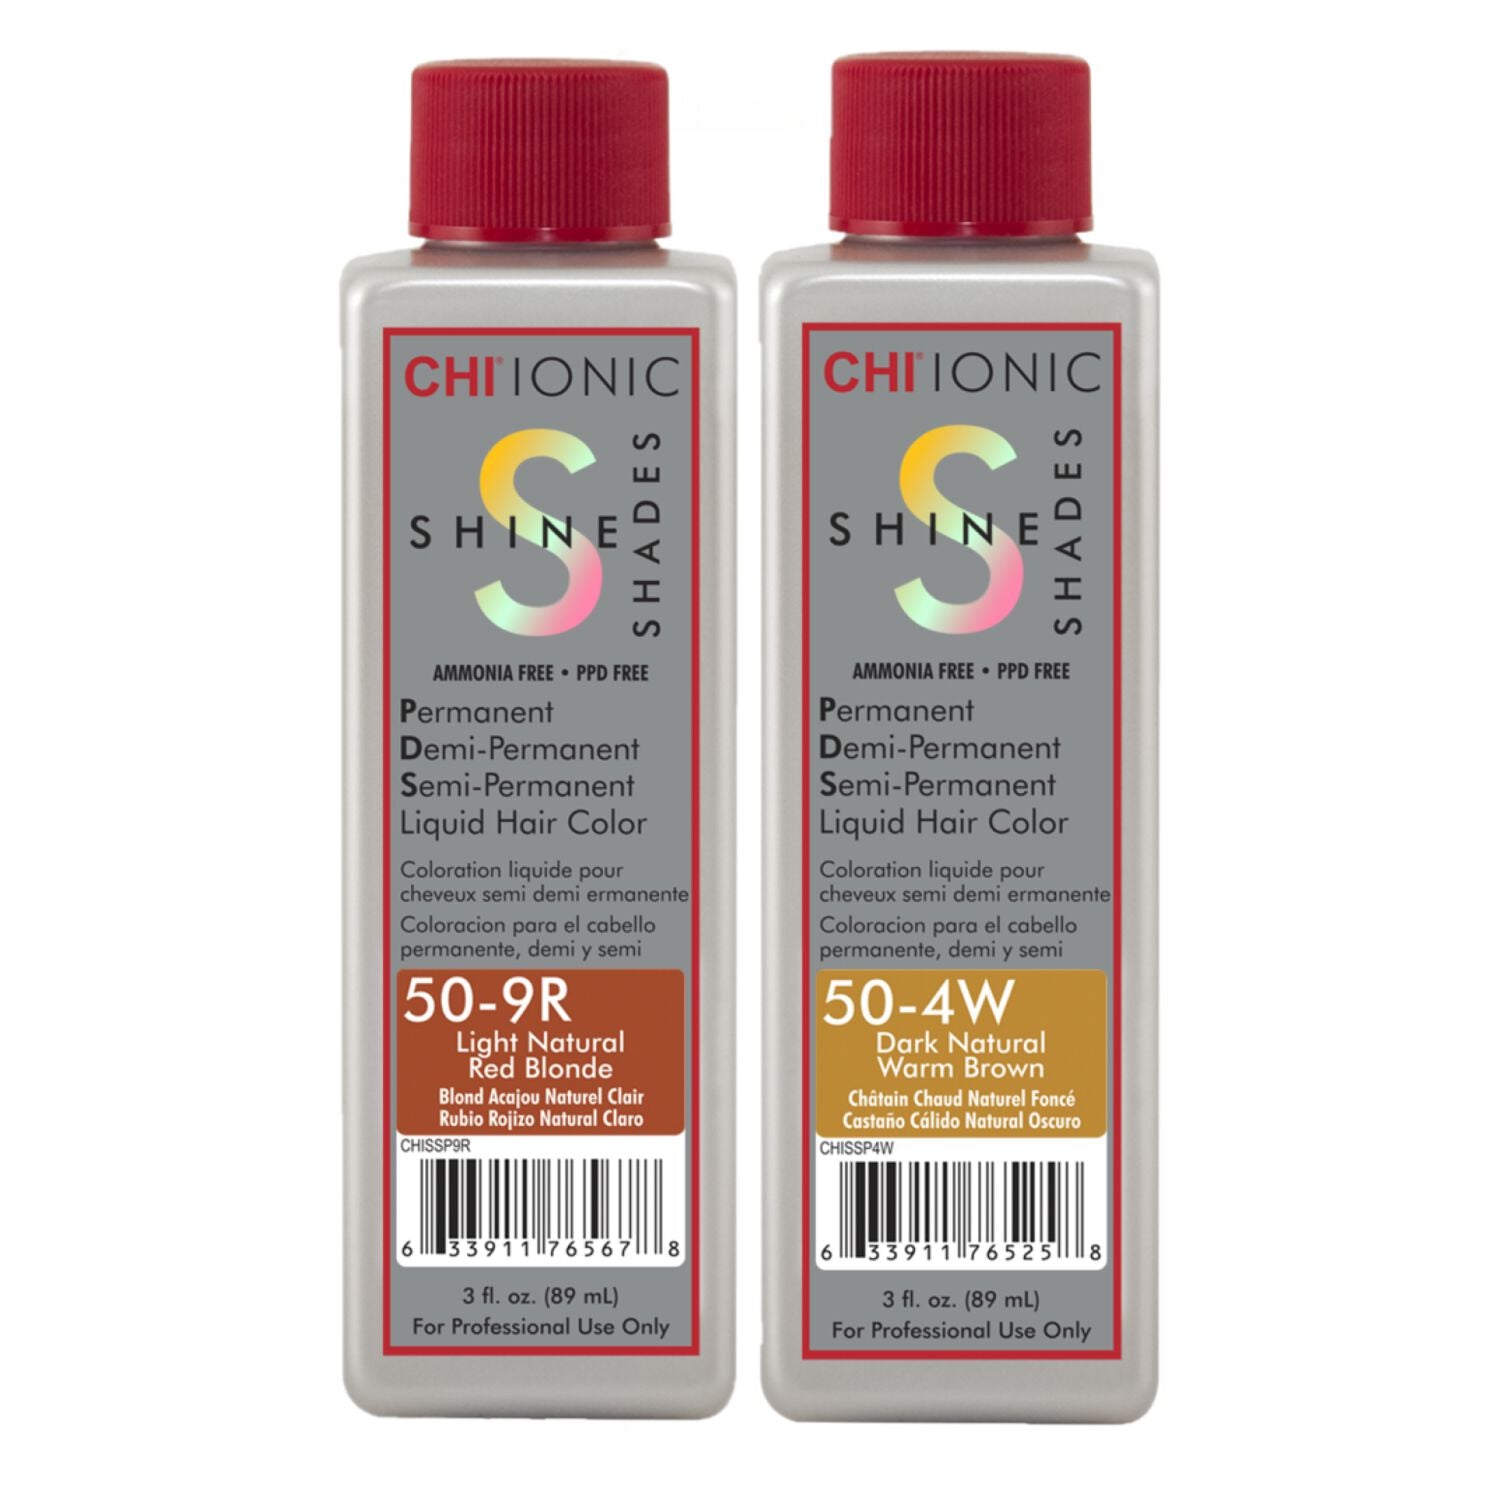 CHI Ionic Shine Shades Coverage Plus Permanent Hair Color